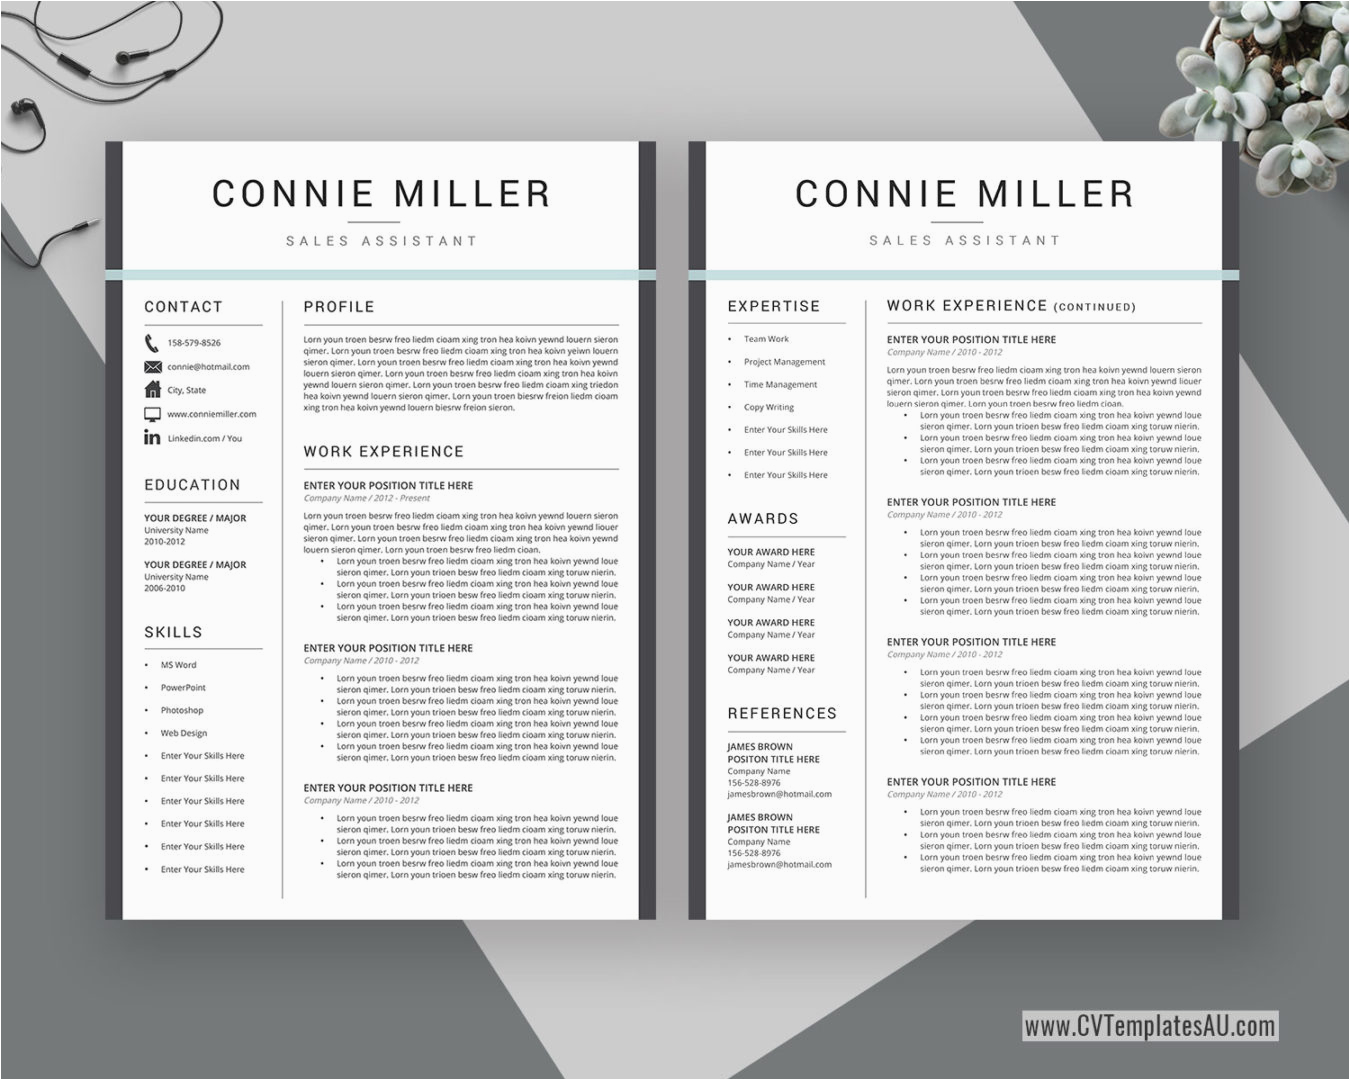 professional australian cv templates with matching cover letter and references cv fonts and icons australian cv templates for australian job seekers 08